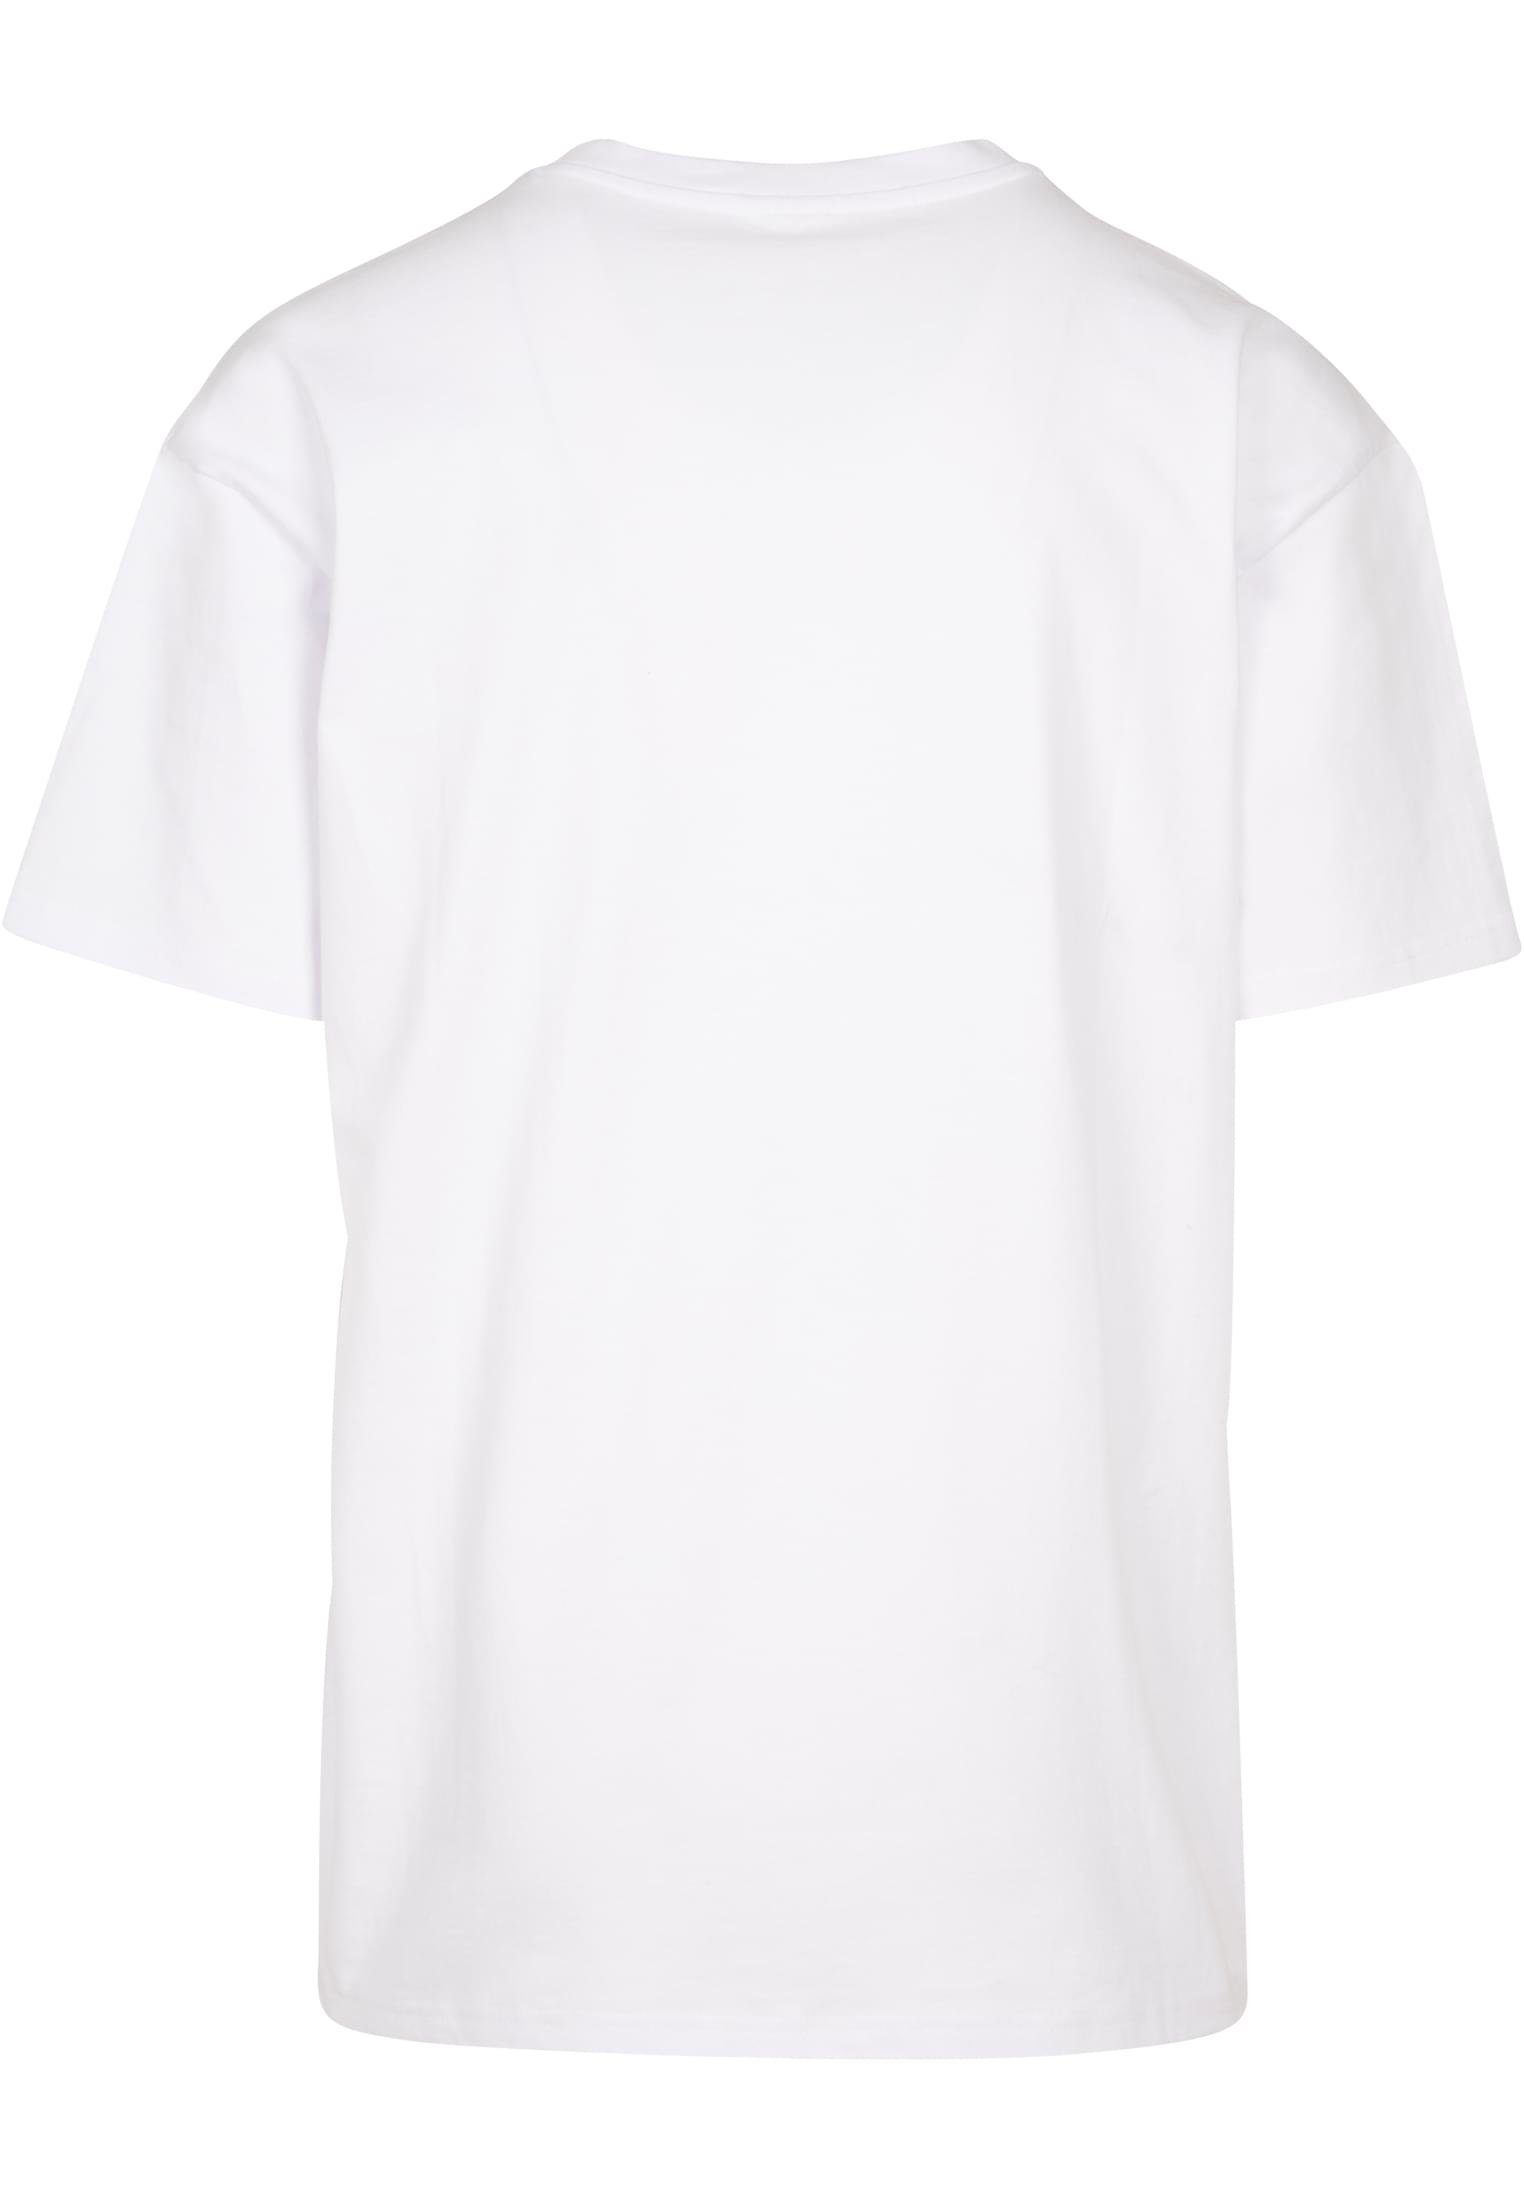 Mister Tee a Pimp Upscale Oversize Kurzarmshirt by Butterfly Tee (1-tlg) white Herren